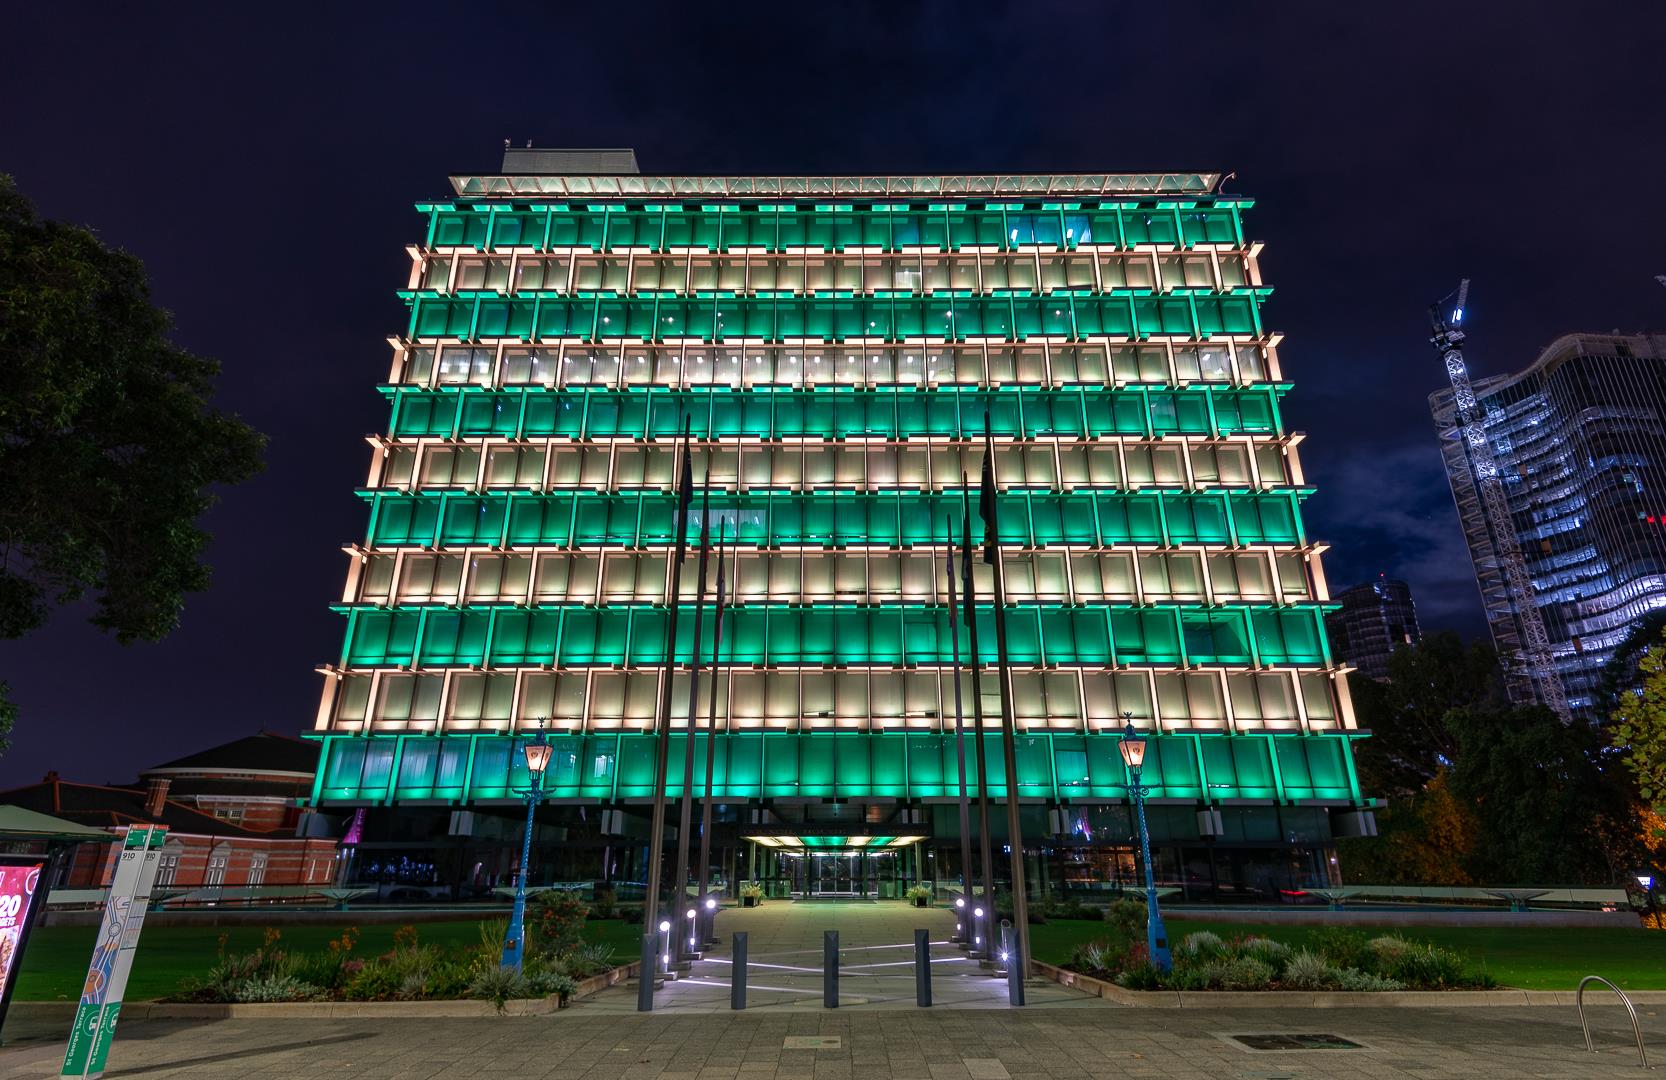 Council House lights up green and gold